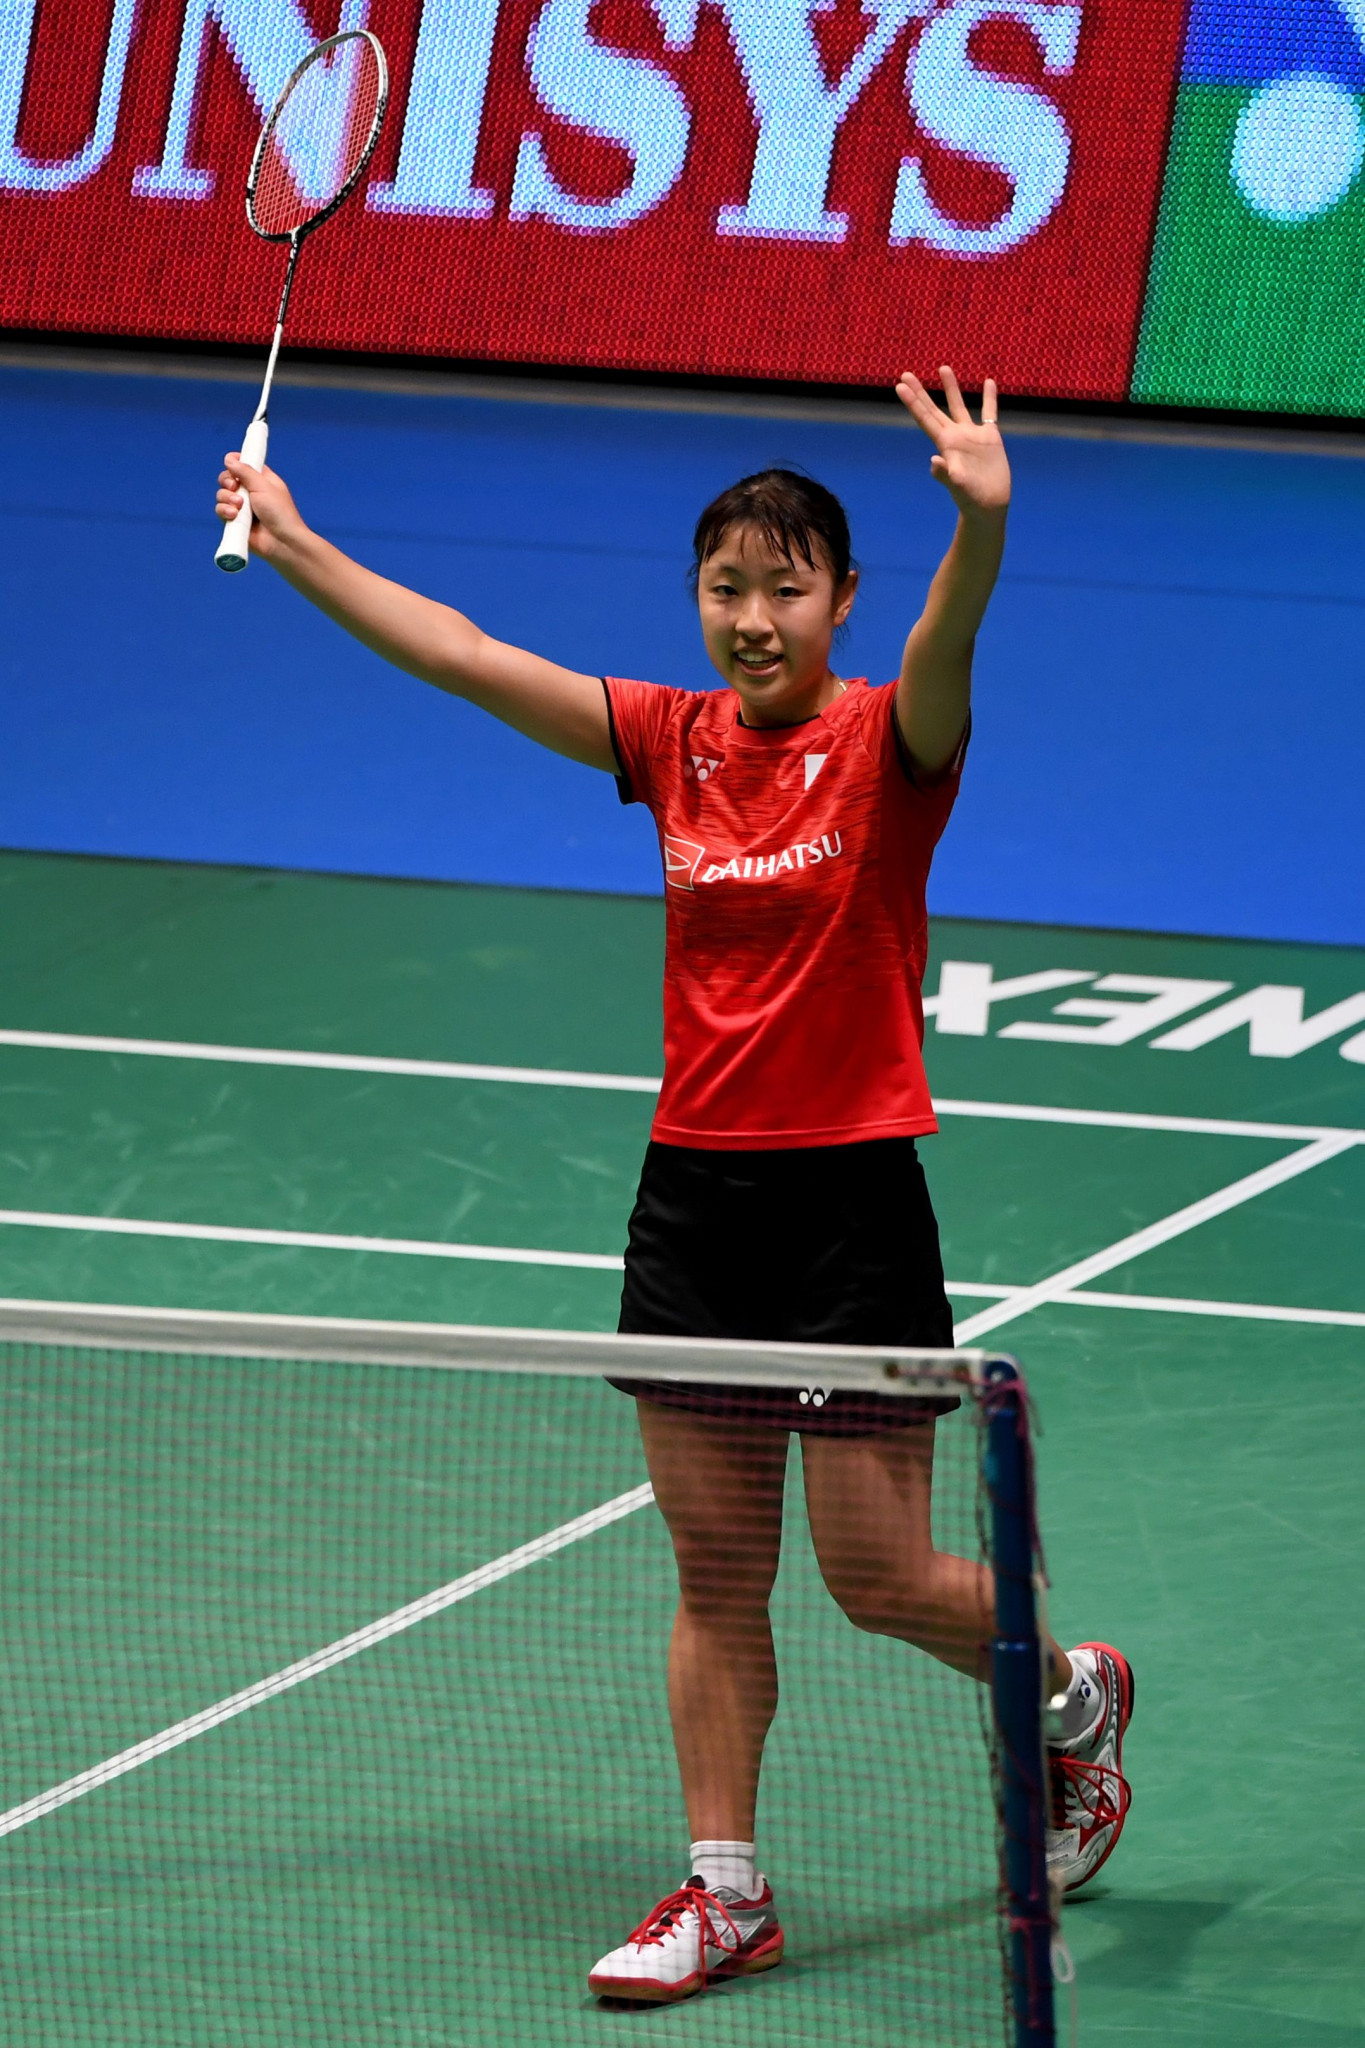 Japan's Nozomi Okuhara won a repeat of last month's World Championship final in front of her own fans ©Getty Images